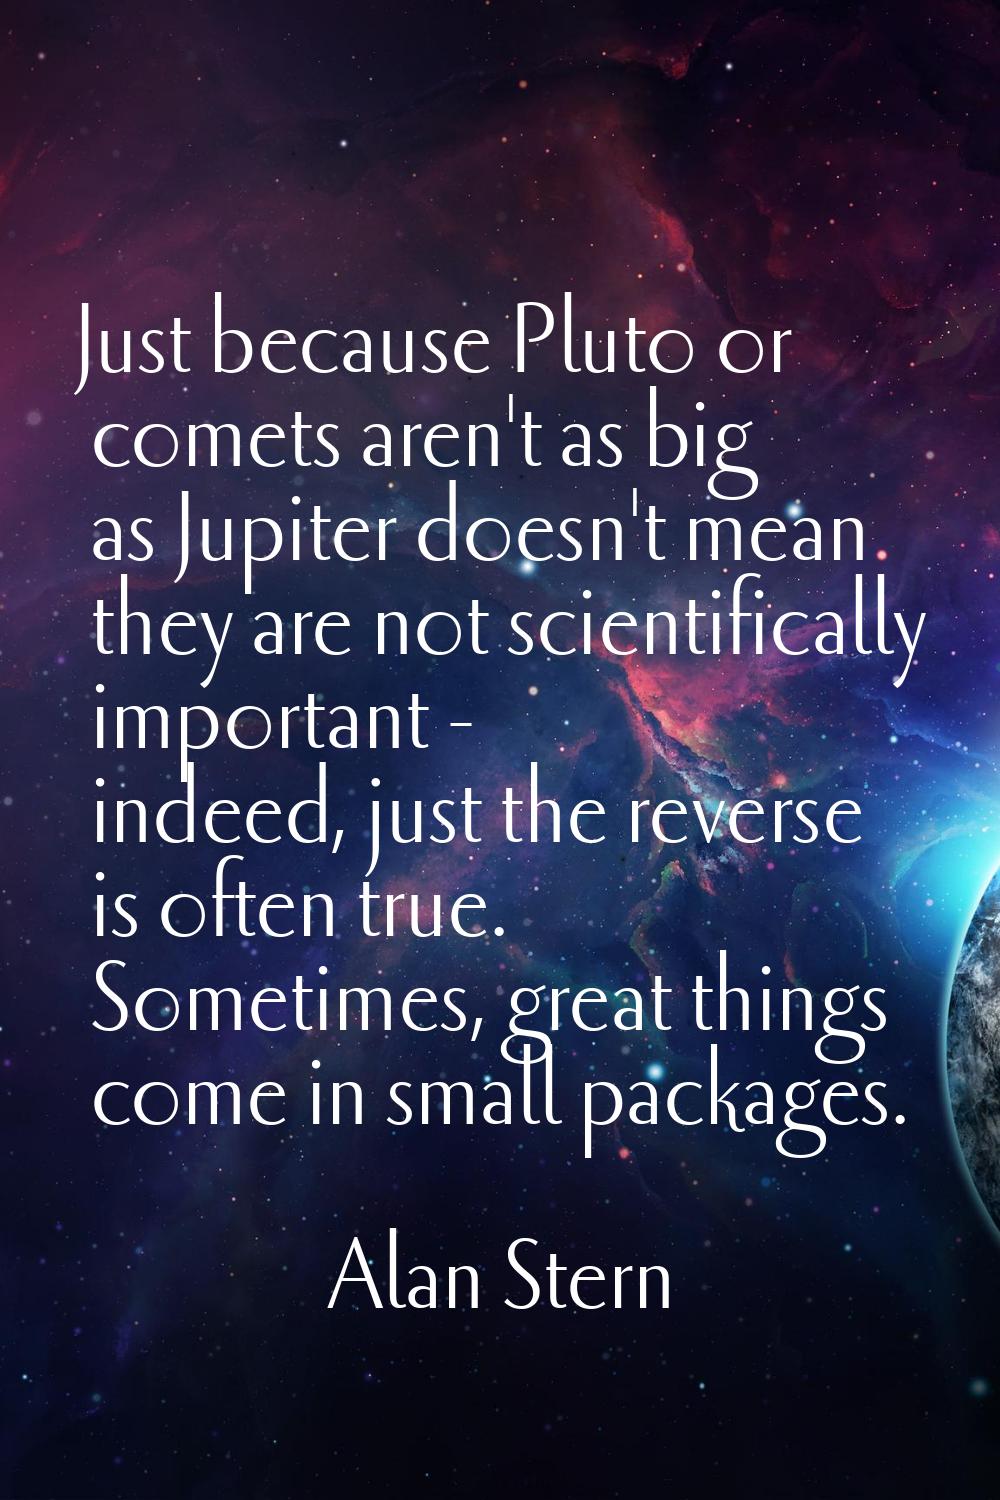 Just because Pluto or comets aren't as big as Jupiter doesn't mean they are not scientifically impo